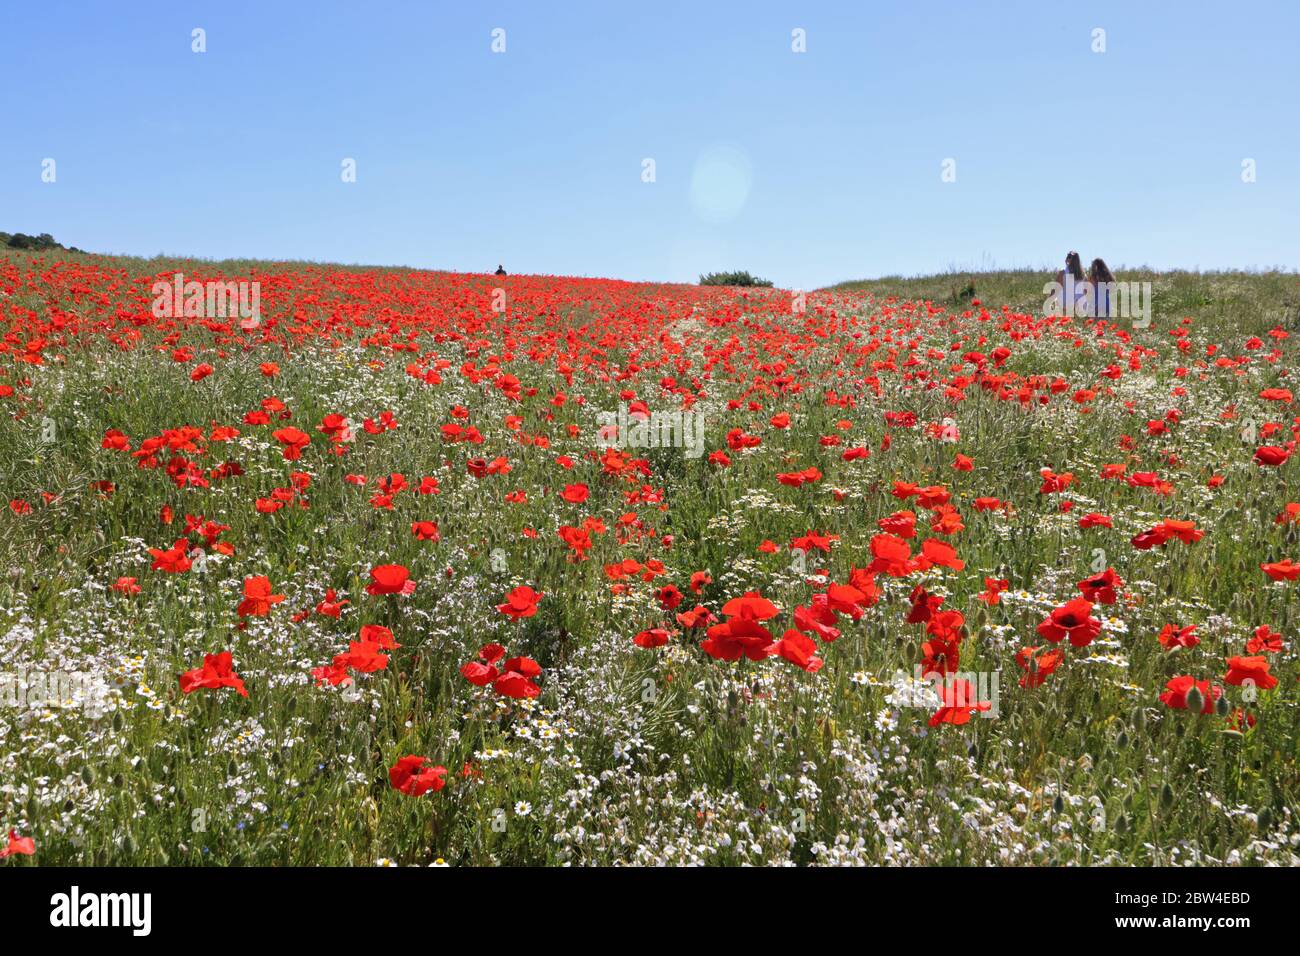 Guildford, Surrey, UK. 29th May, 2020. A splash of red in the Surrey countryside. Beautiful poppies give a dazzling display in the warm sunshine near the North Downs at Guildford. Credit: Julia Gavin Stock Photo